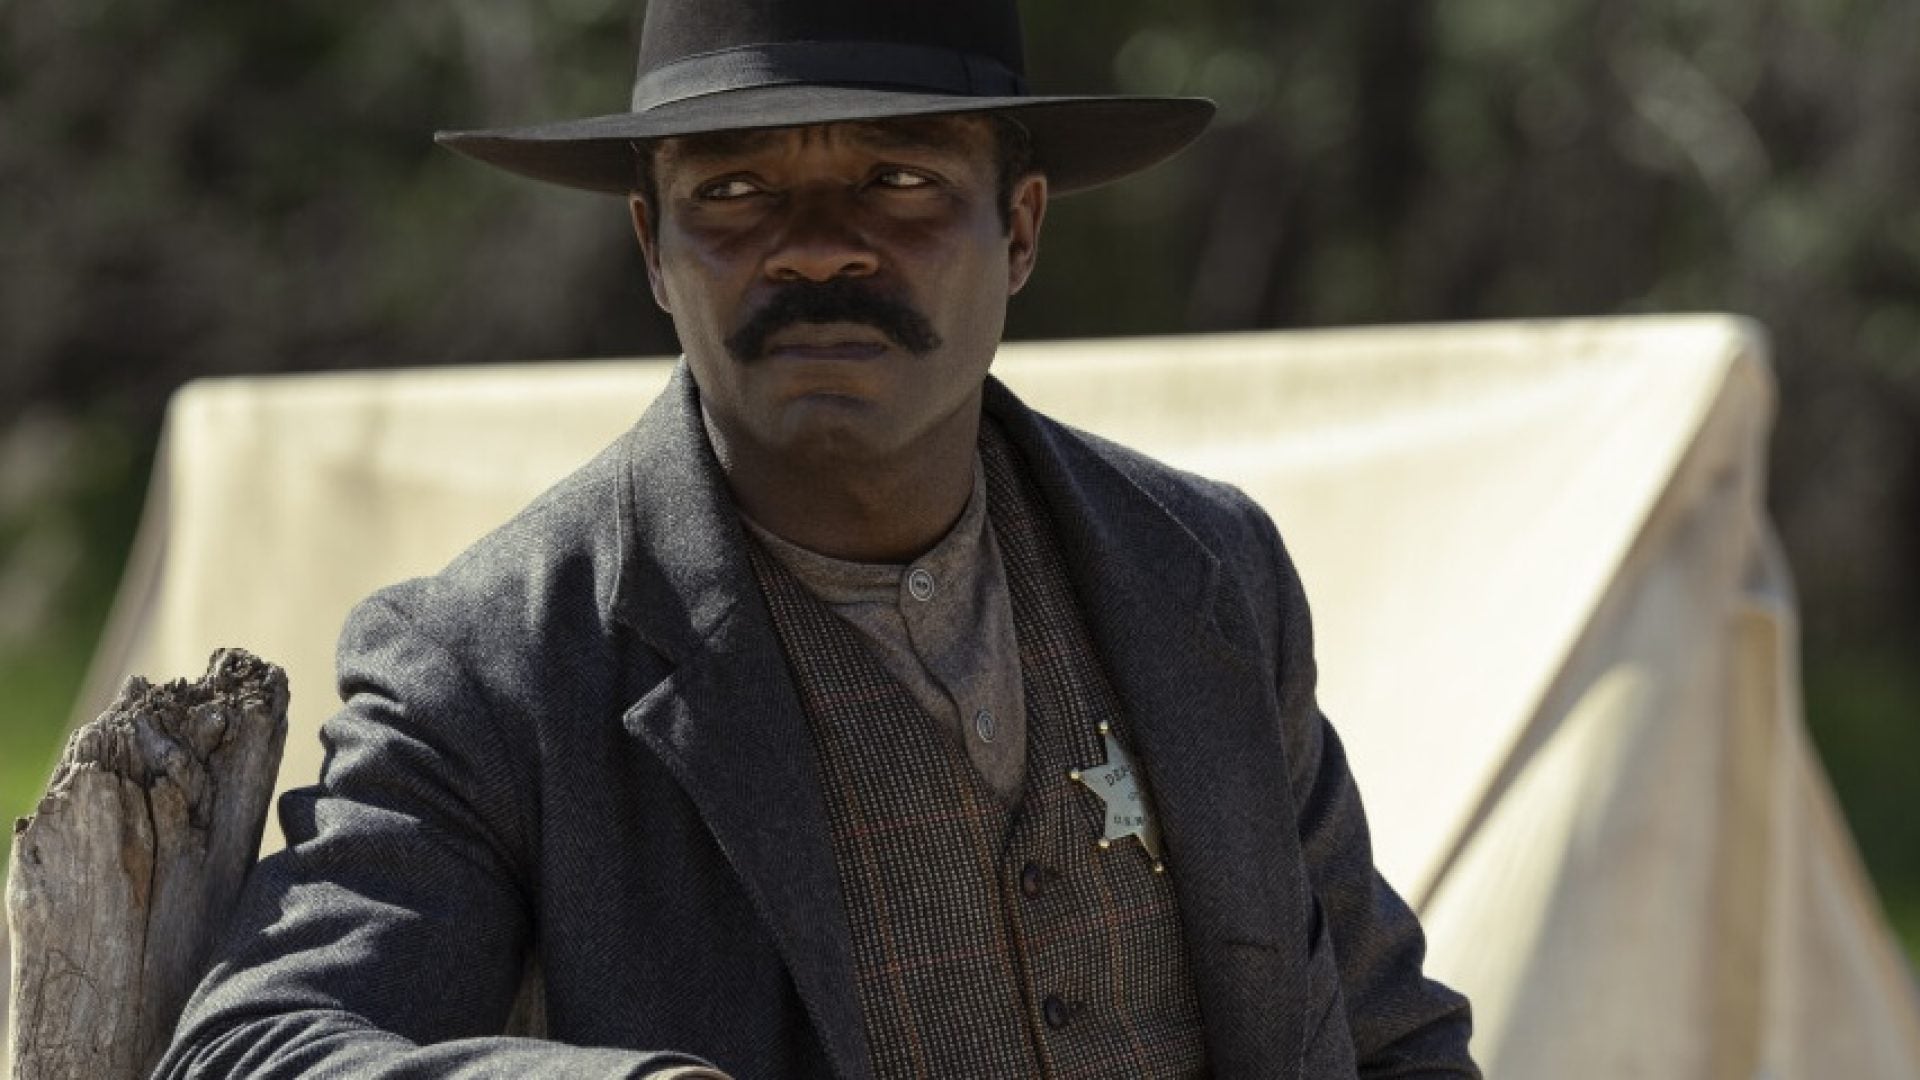 This Ain’t Texas, But It Is A List of Black Western Films To Add To Your Watch List